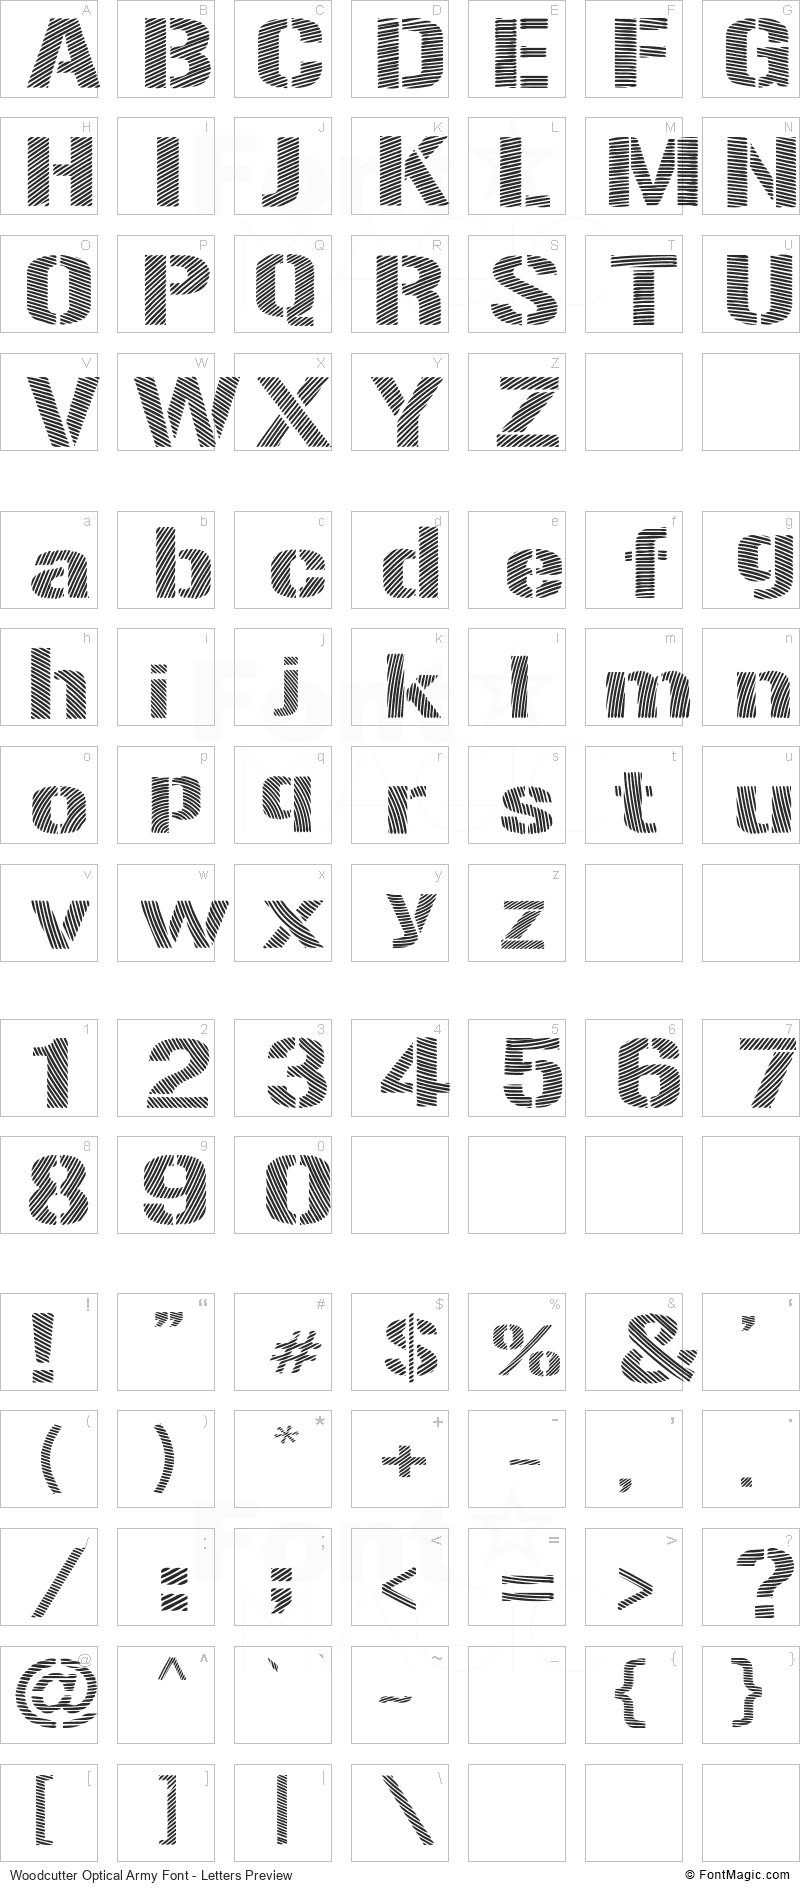 Woodcutter Optical Army Font - All Latters Preview Chart